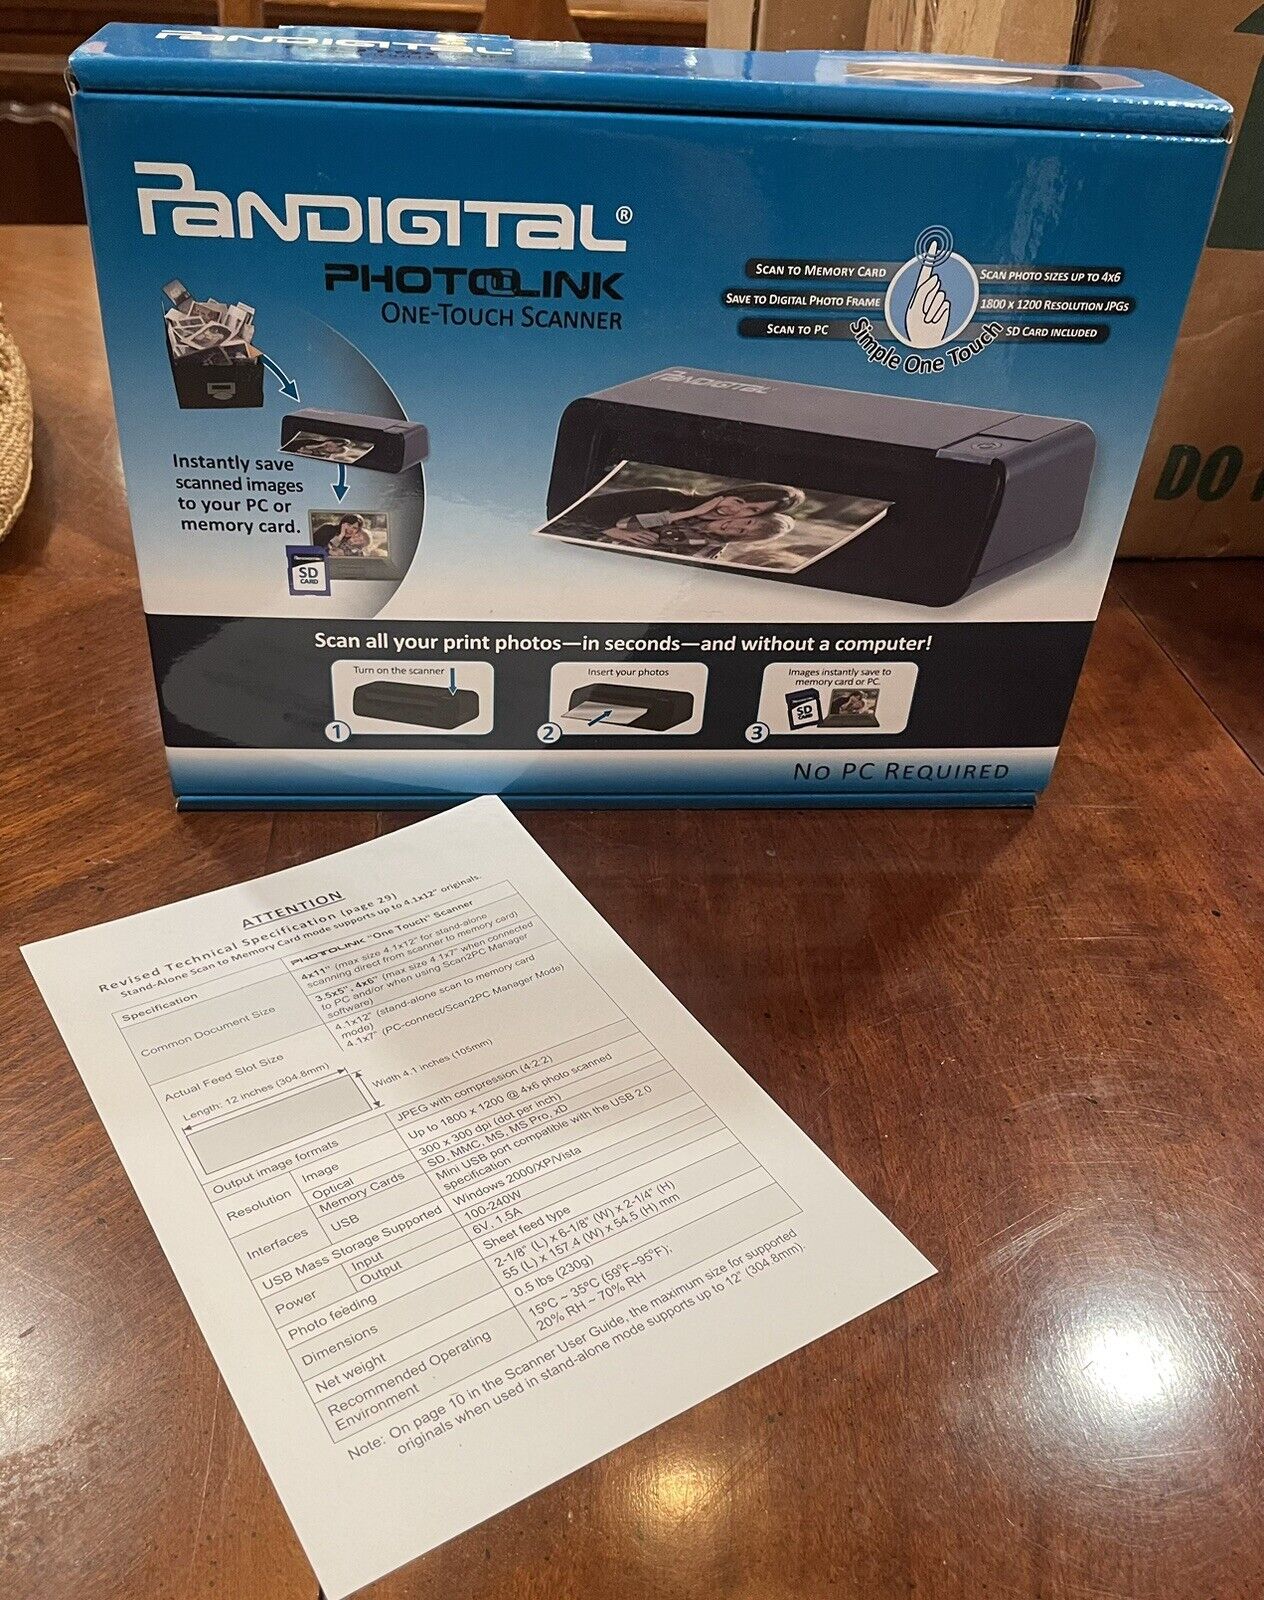 Pandigital Photo link One-Touch Print Scanner